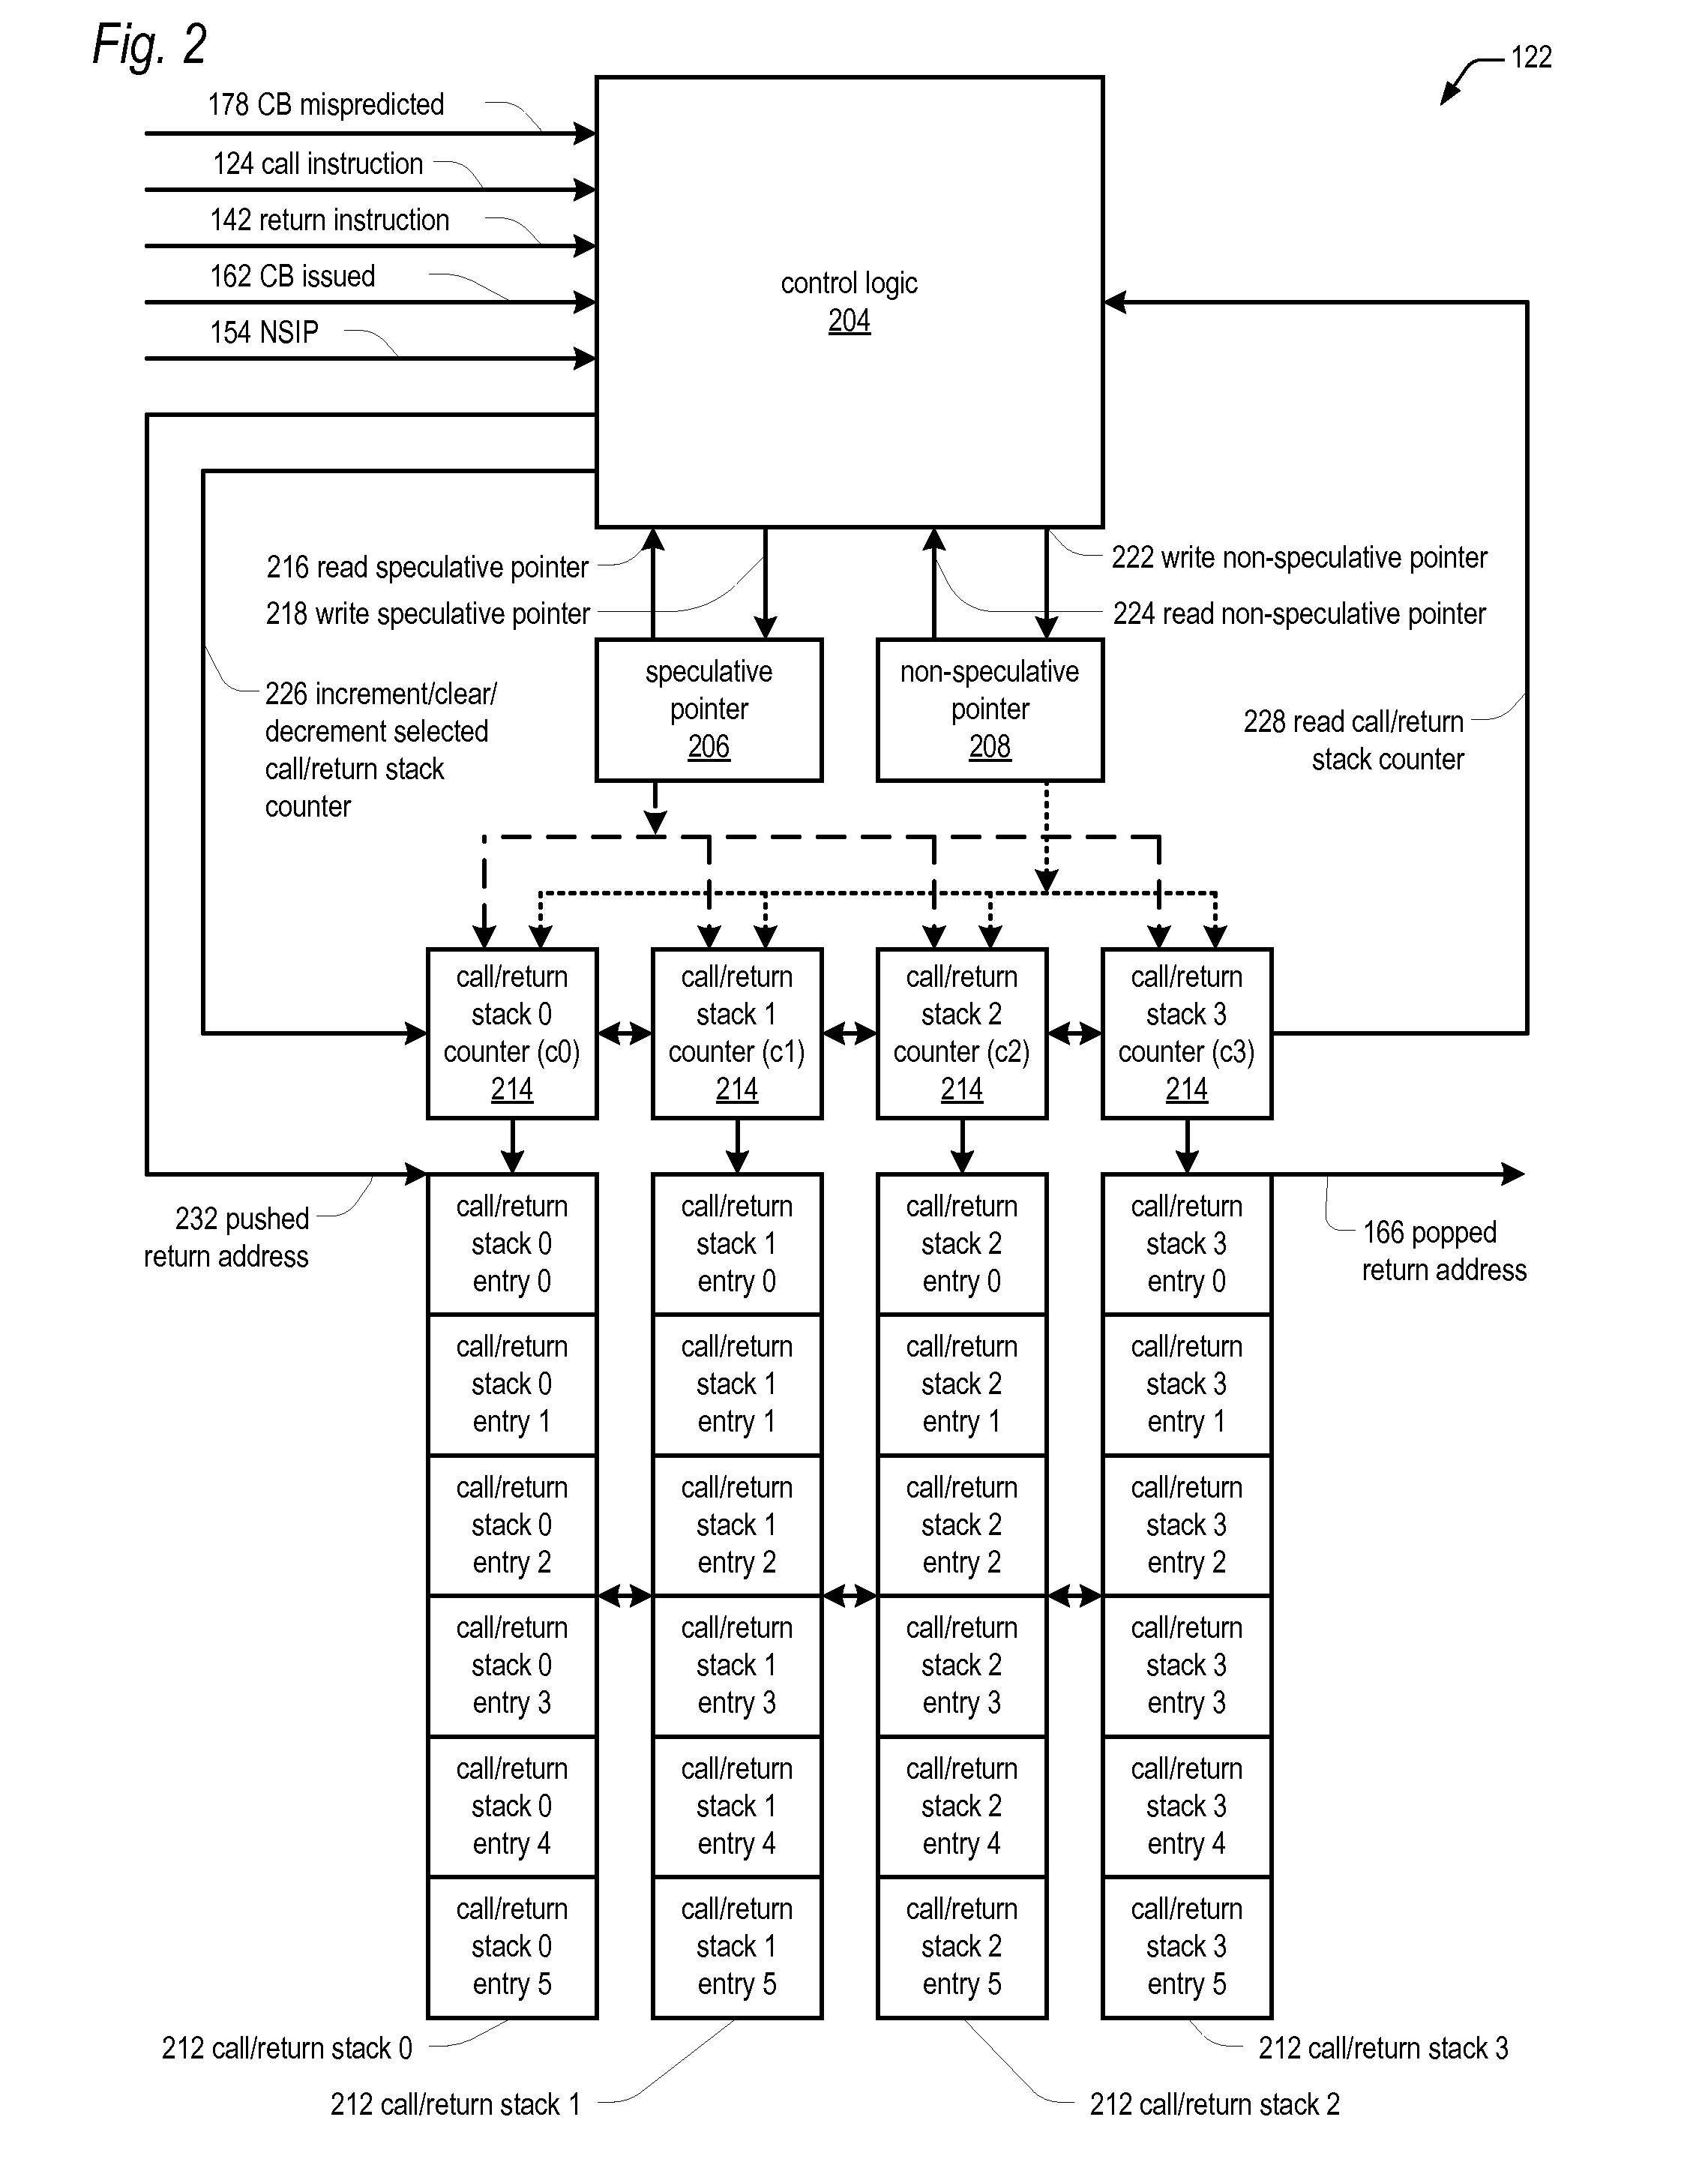 Apparatus and method for fast correct resolution of call and return instructions using multiple call/return stacks in the presence of speculative conditional instruction execution in a pipelined microprocessor